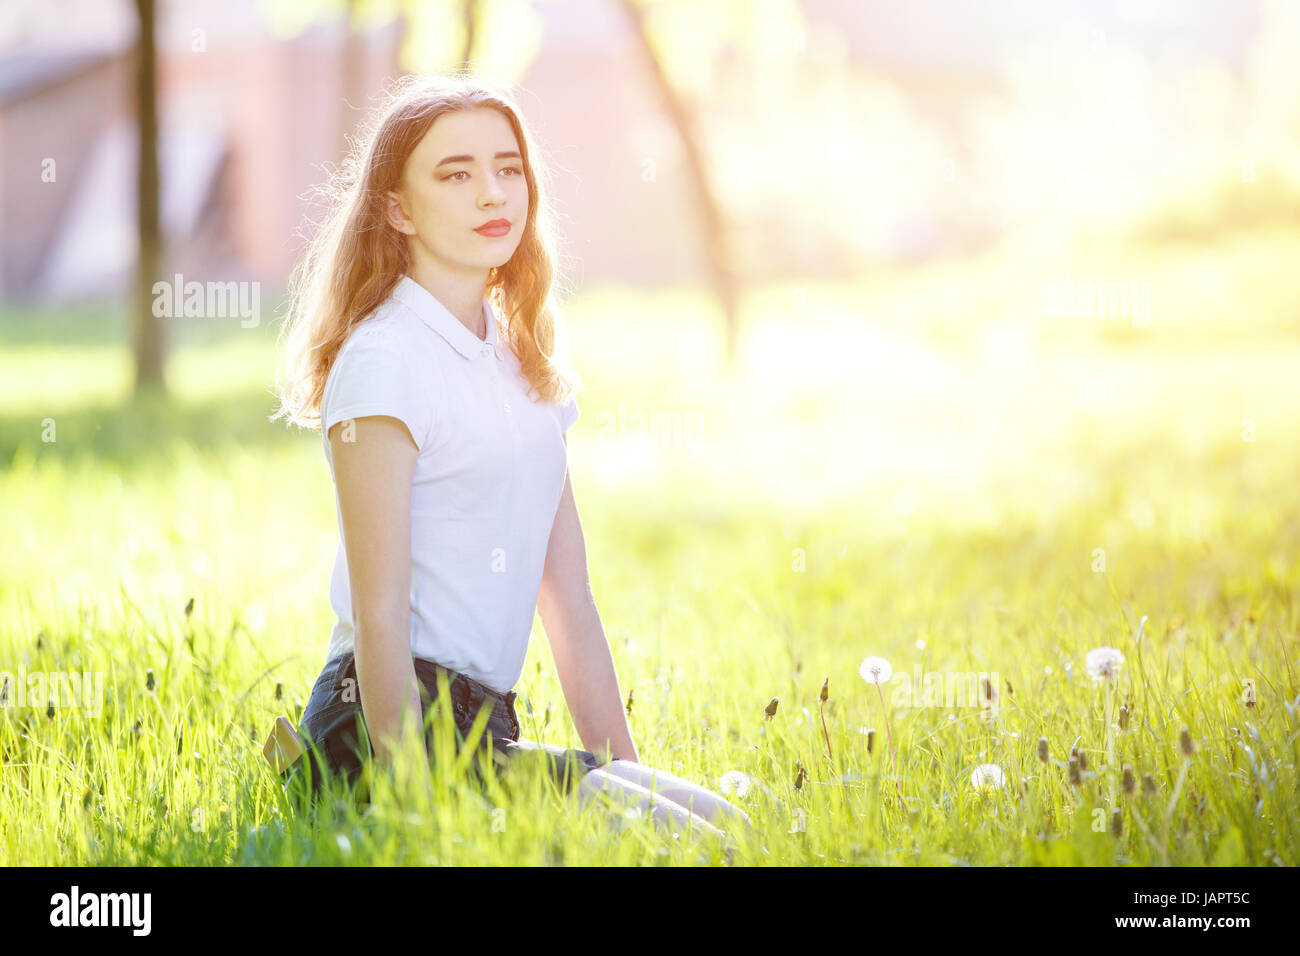 Young teenage girl sitting on green grass in sunny park. Image with copy space aside Stock Photo